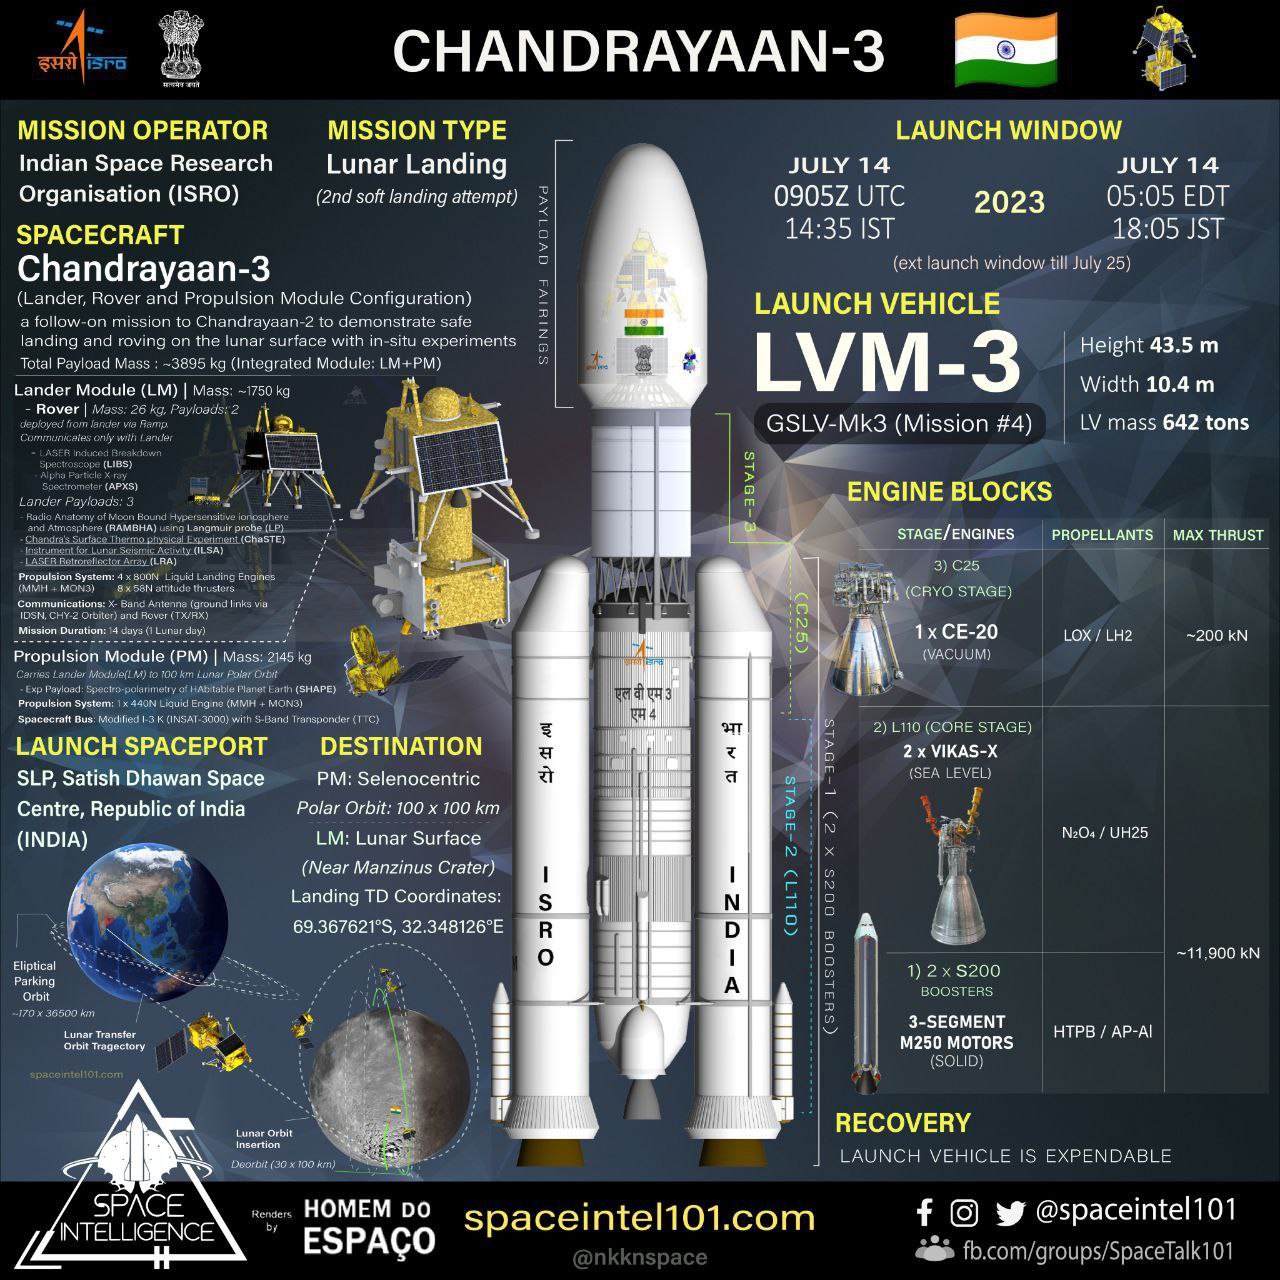 INDIA'S THIRD MOON MISSION LAUNCHED TODAY